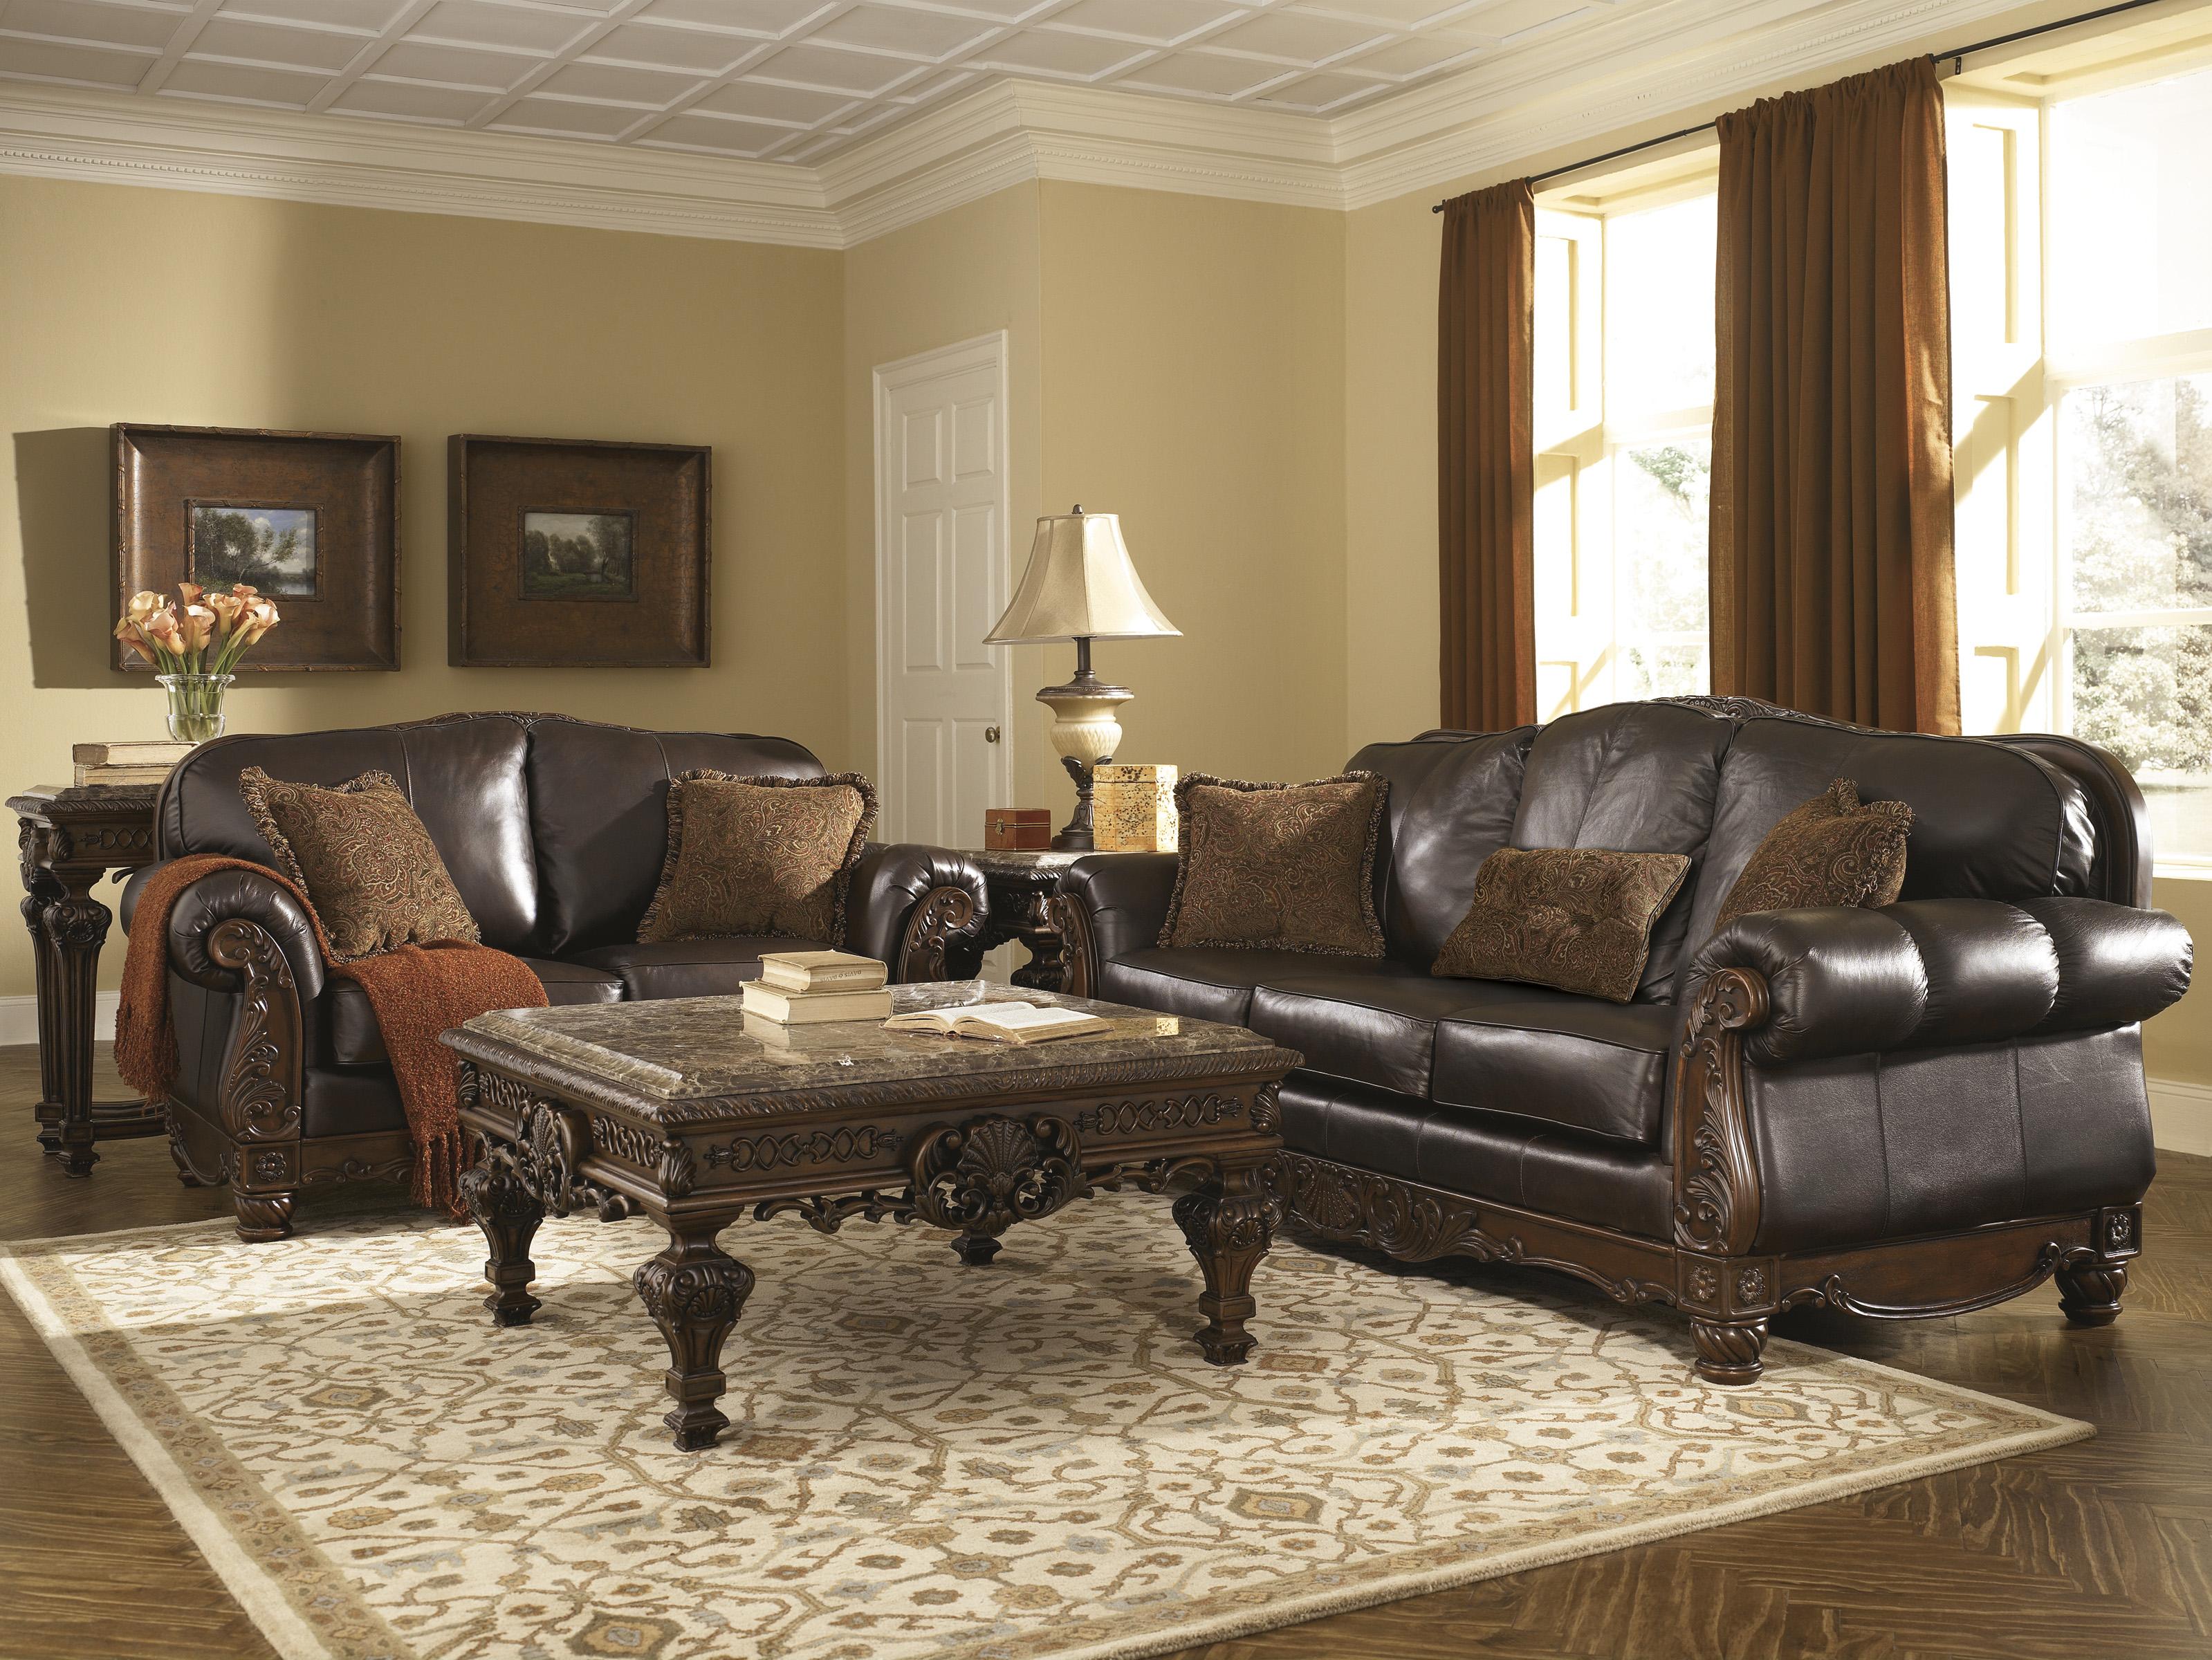 

    
Ashley North Shore  DuraBlend Living Room Set 2pcs Dark Brown Traditional Style
